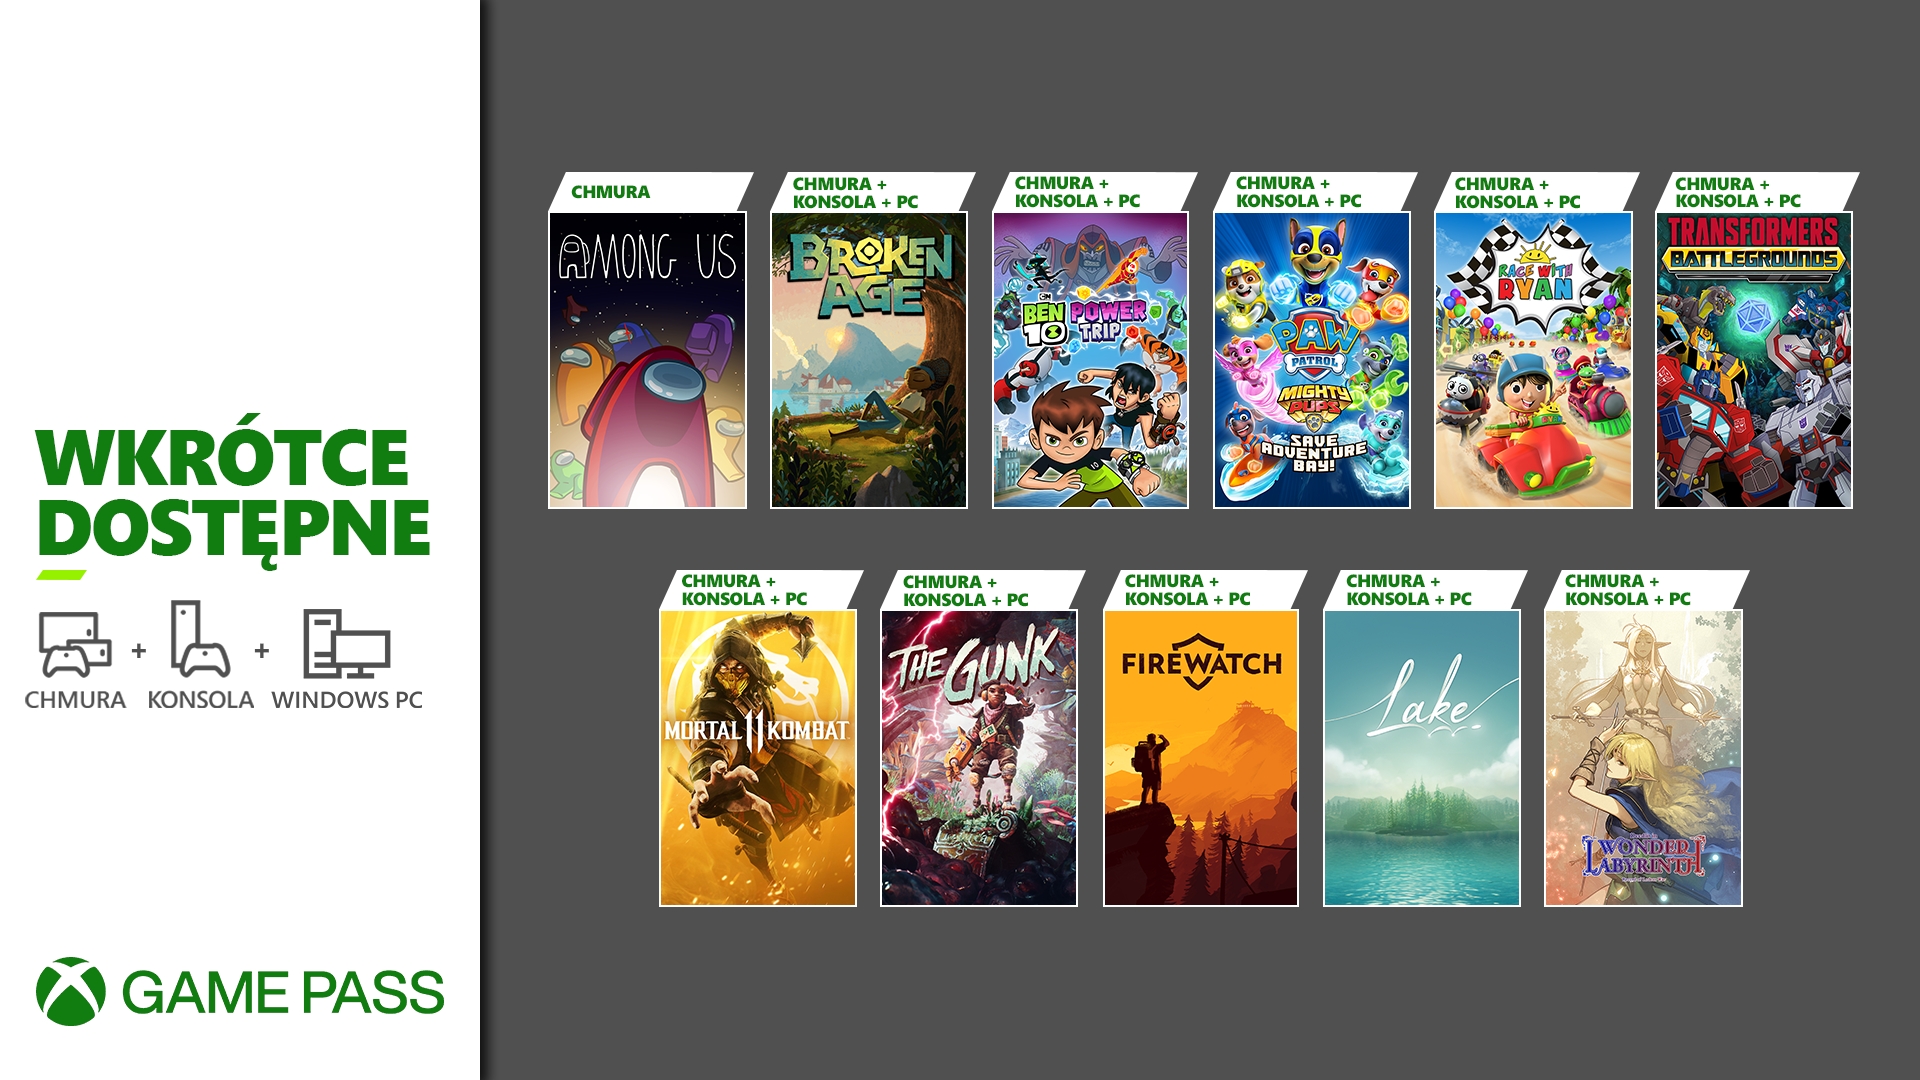 New Xbox Game Pass games at the end of the year